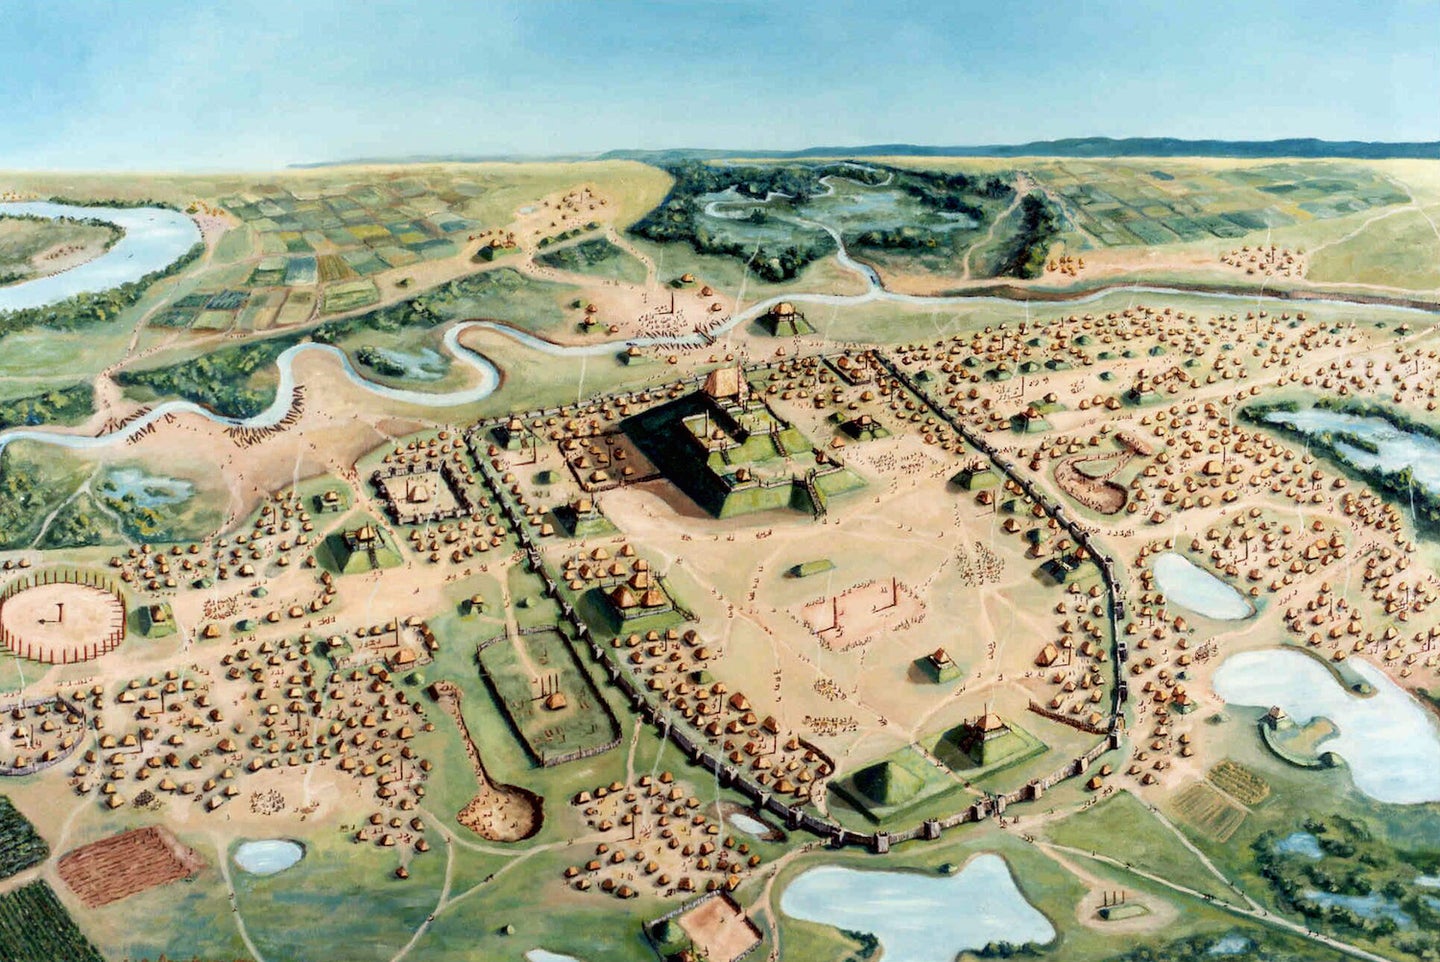 Cahokia, which was located near present-day St. Louis, was the largest prehistoric city in North America in 1150 A.D.